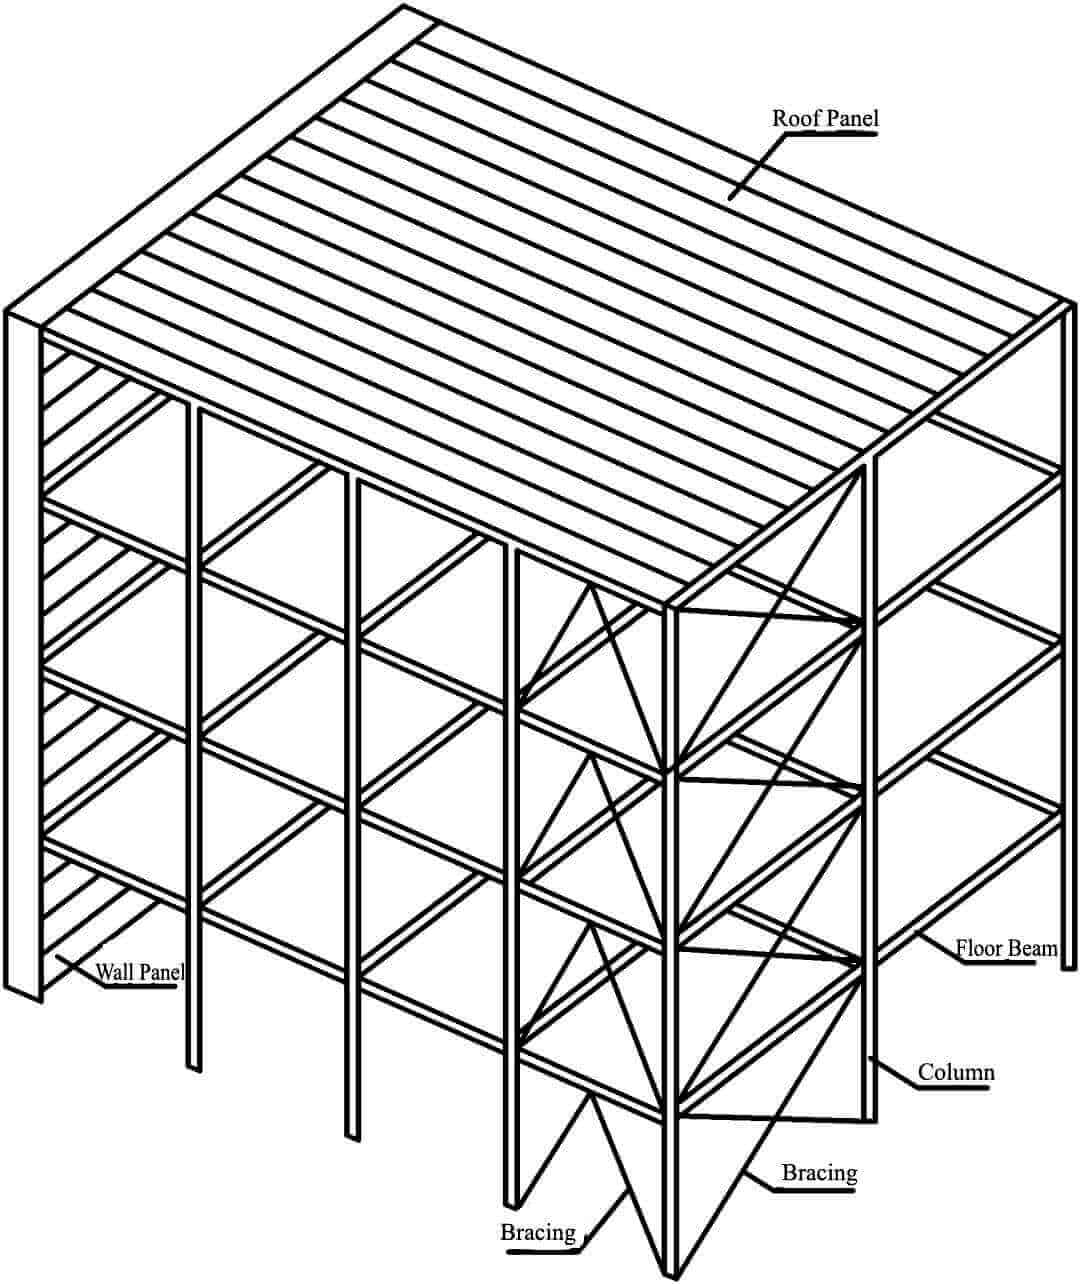 The_Type_of_Steel_Building_Structures_7_steel-frame-structures